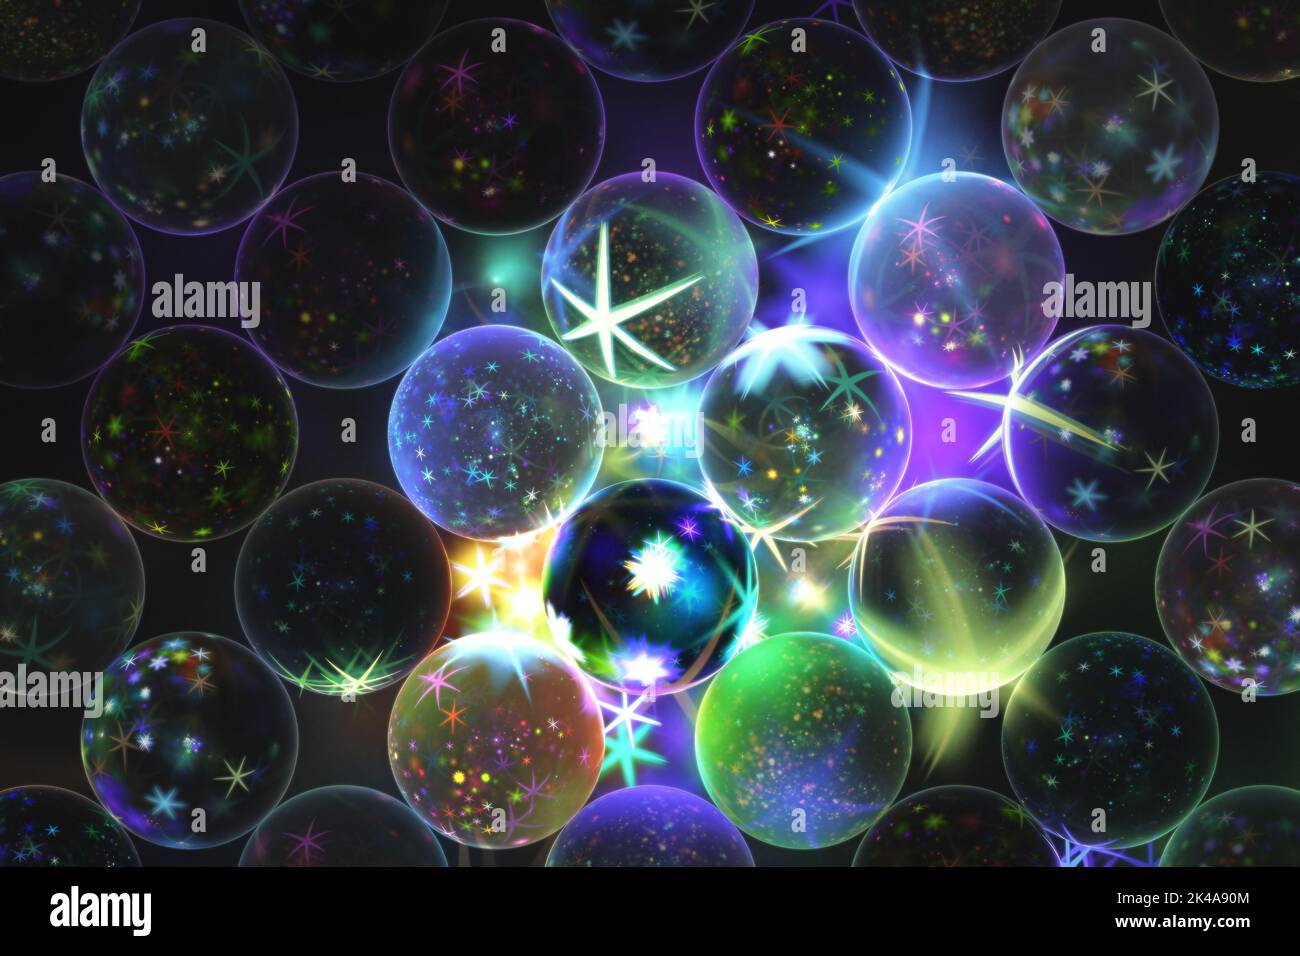 Fractal background with star decorated spheres on dark Stock Photo